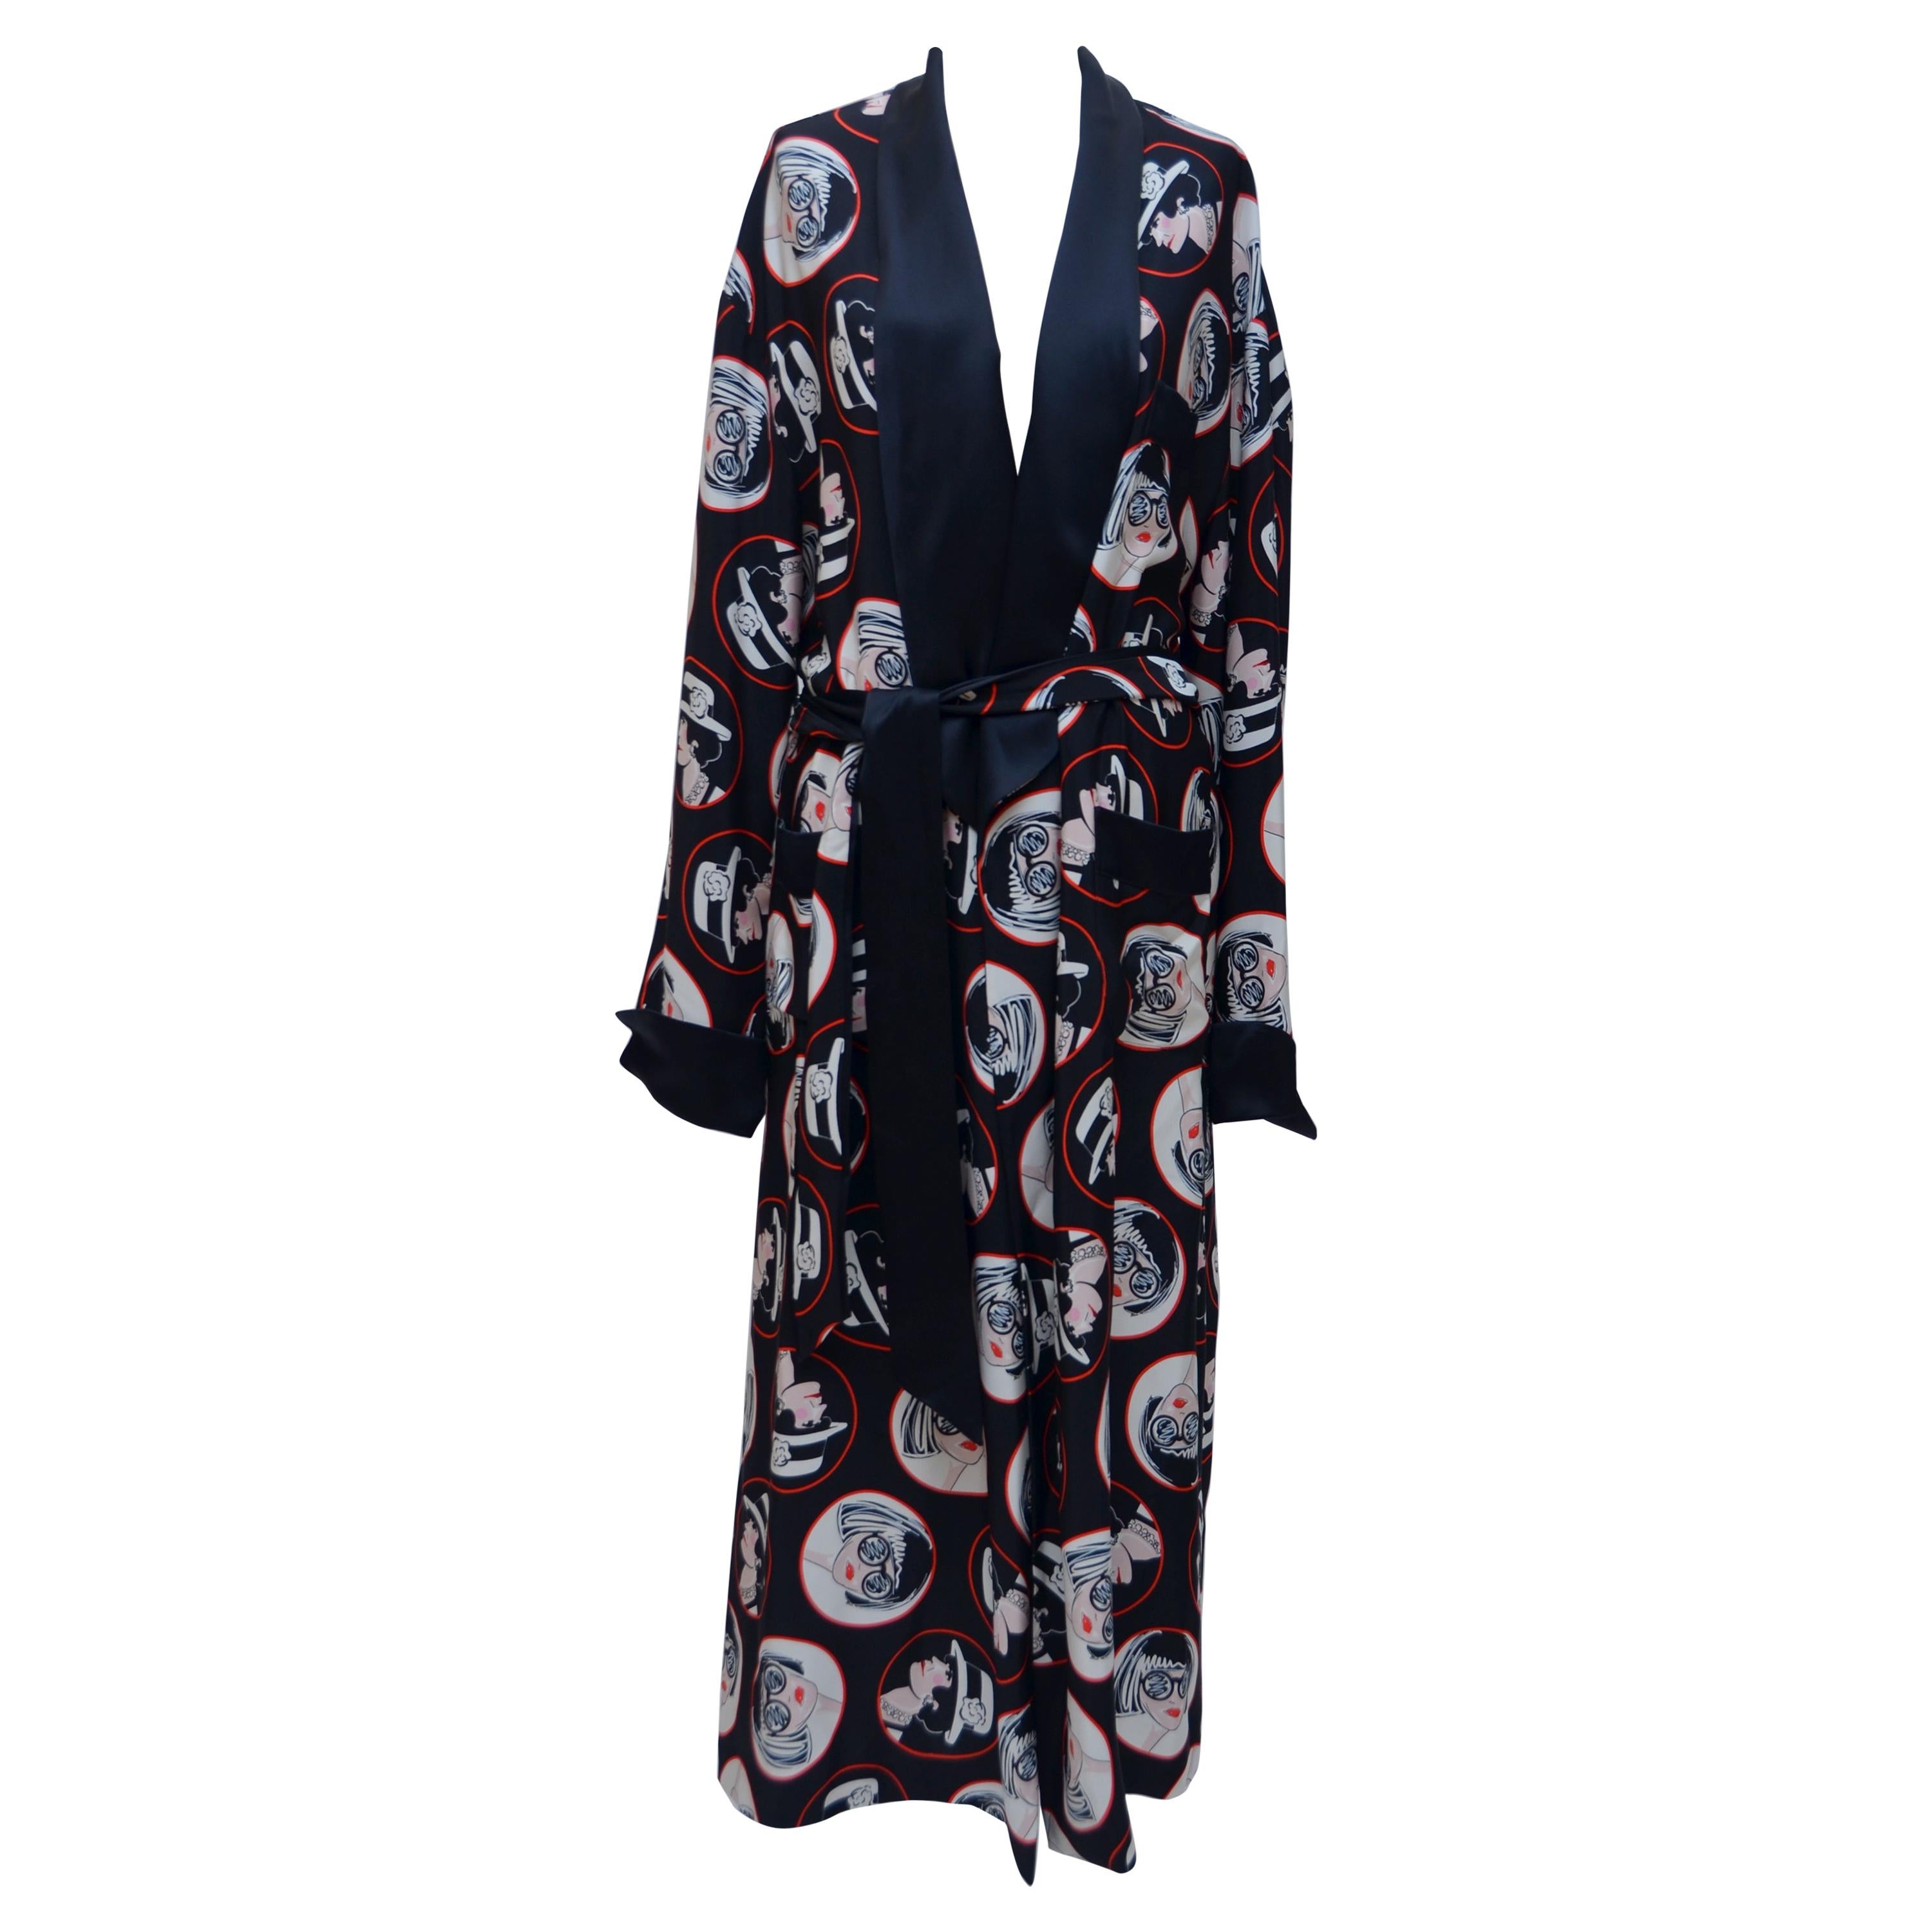 Chanel Robe - 3 For Sale on 1stDibs | chanel robes, chanel robe women's,  chanel silk robe